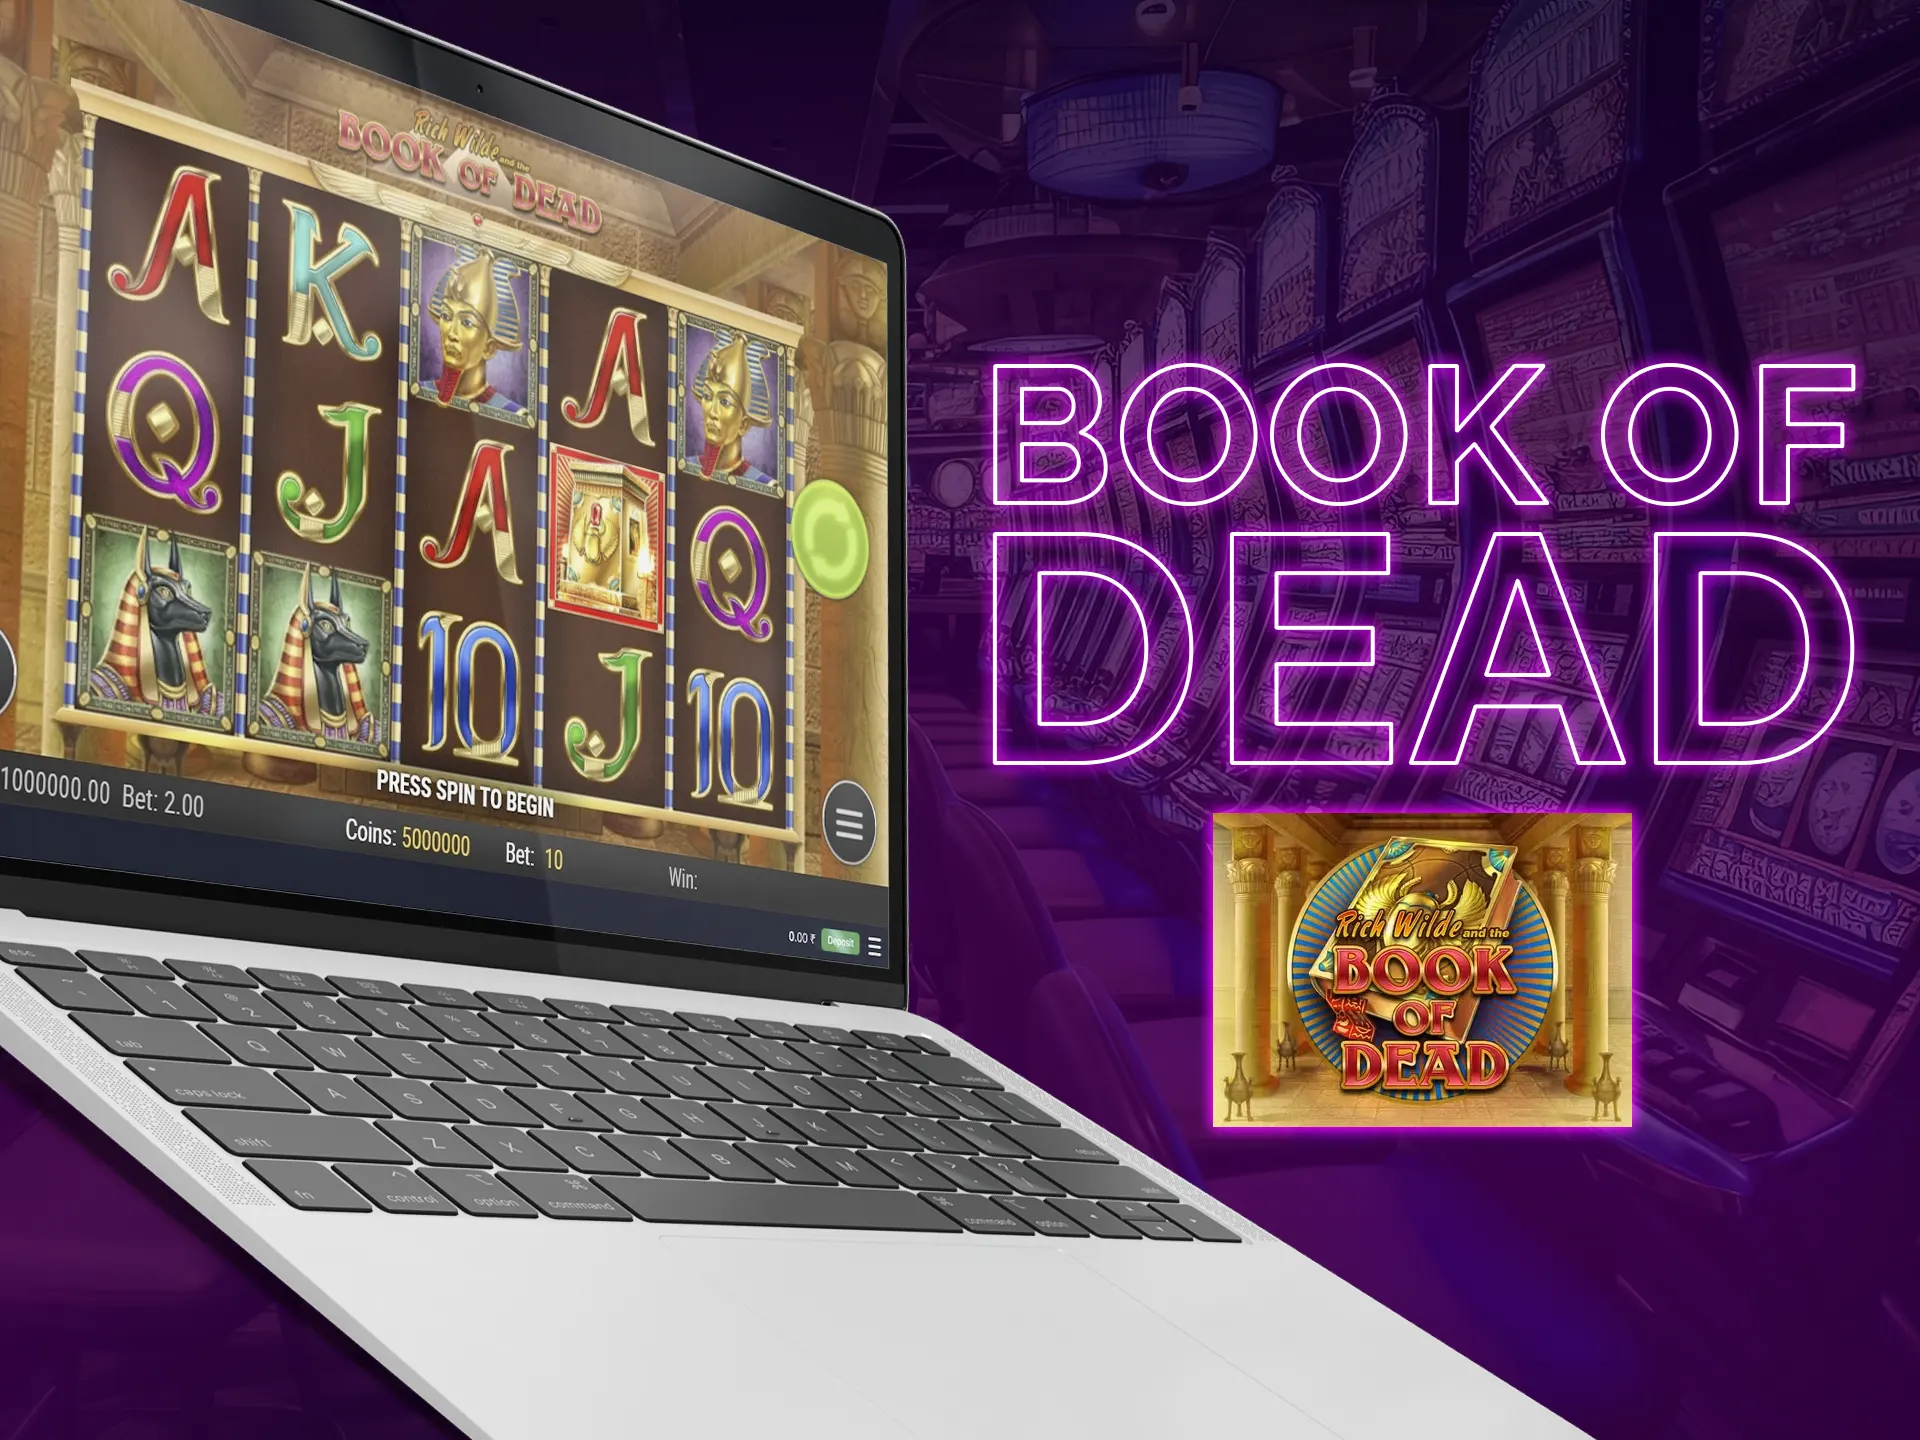 Find yourself in the fascinating world of Ancient Egypt playing the Book of Dead slot.